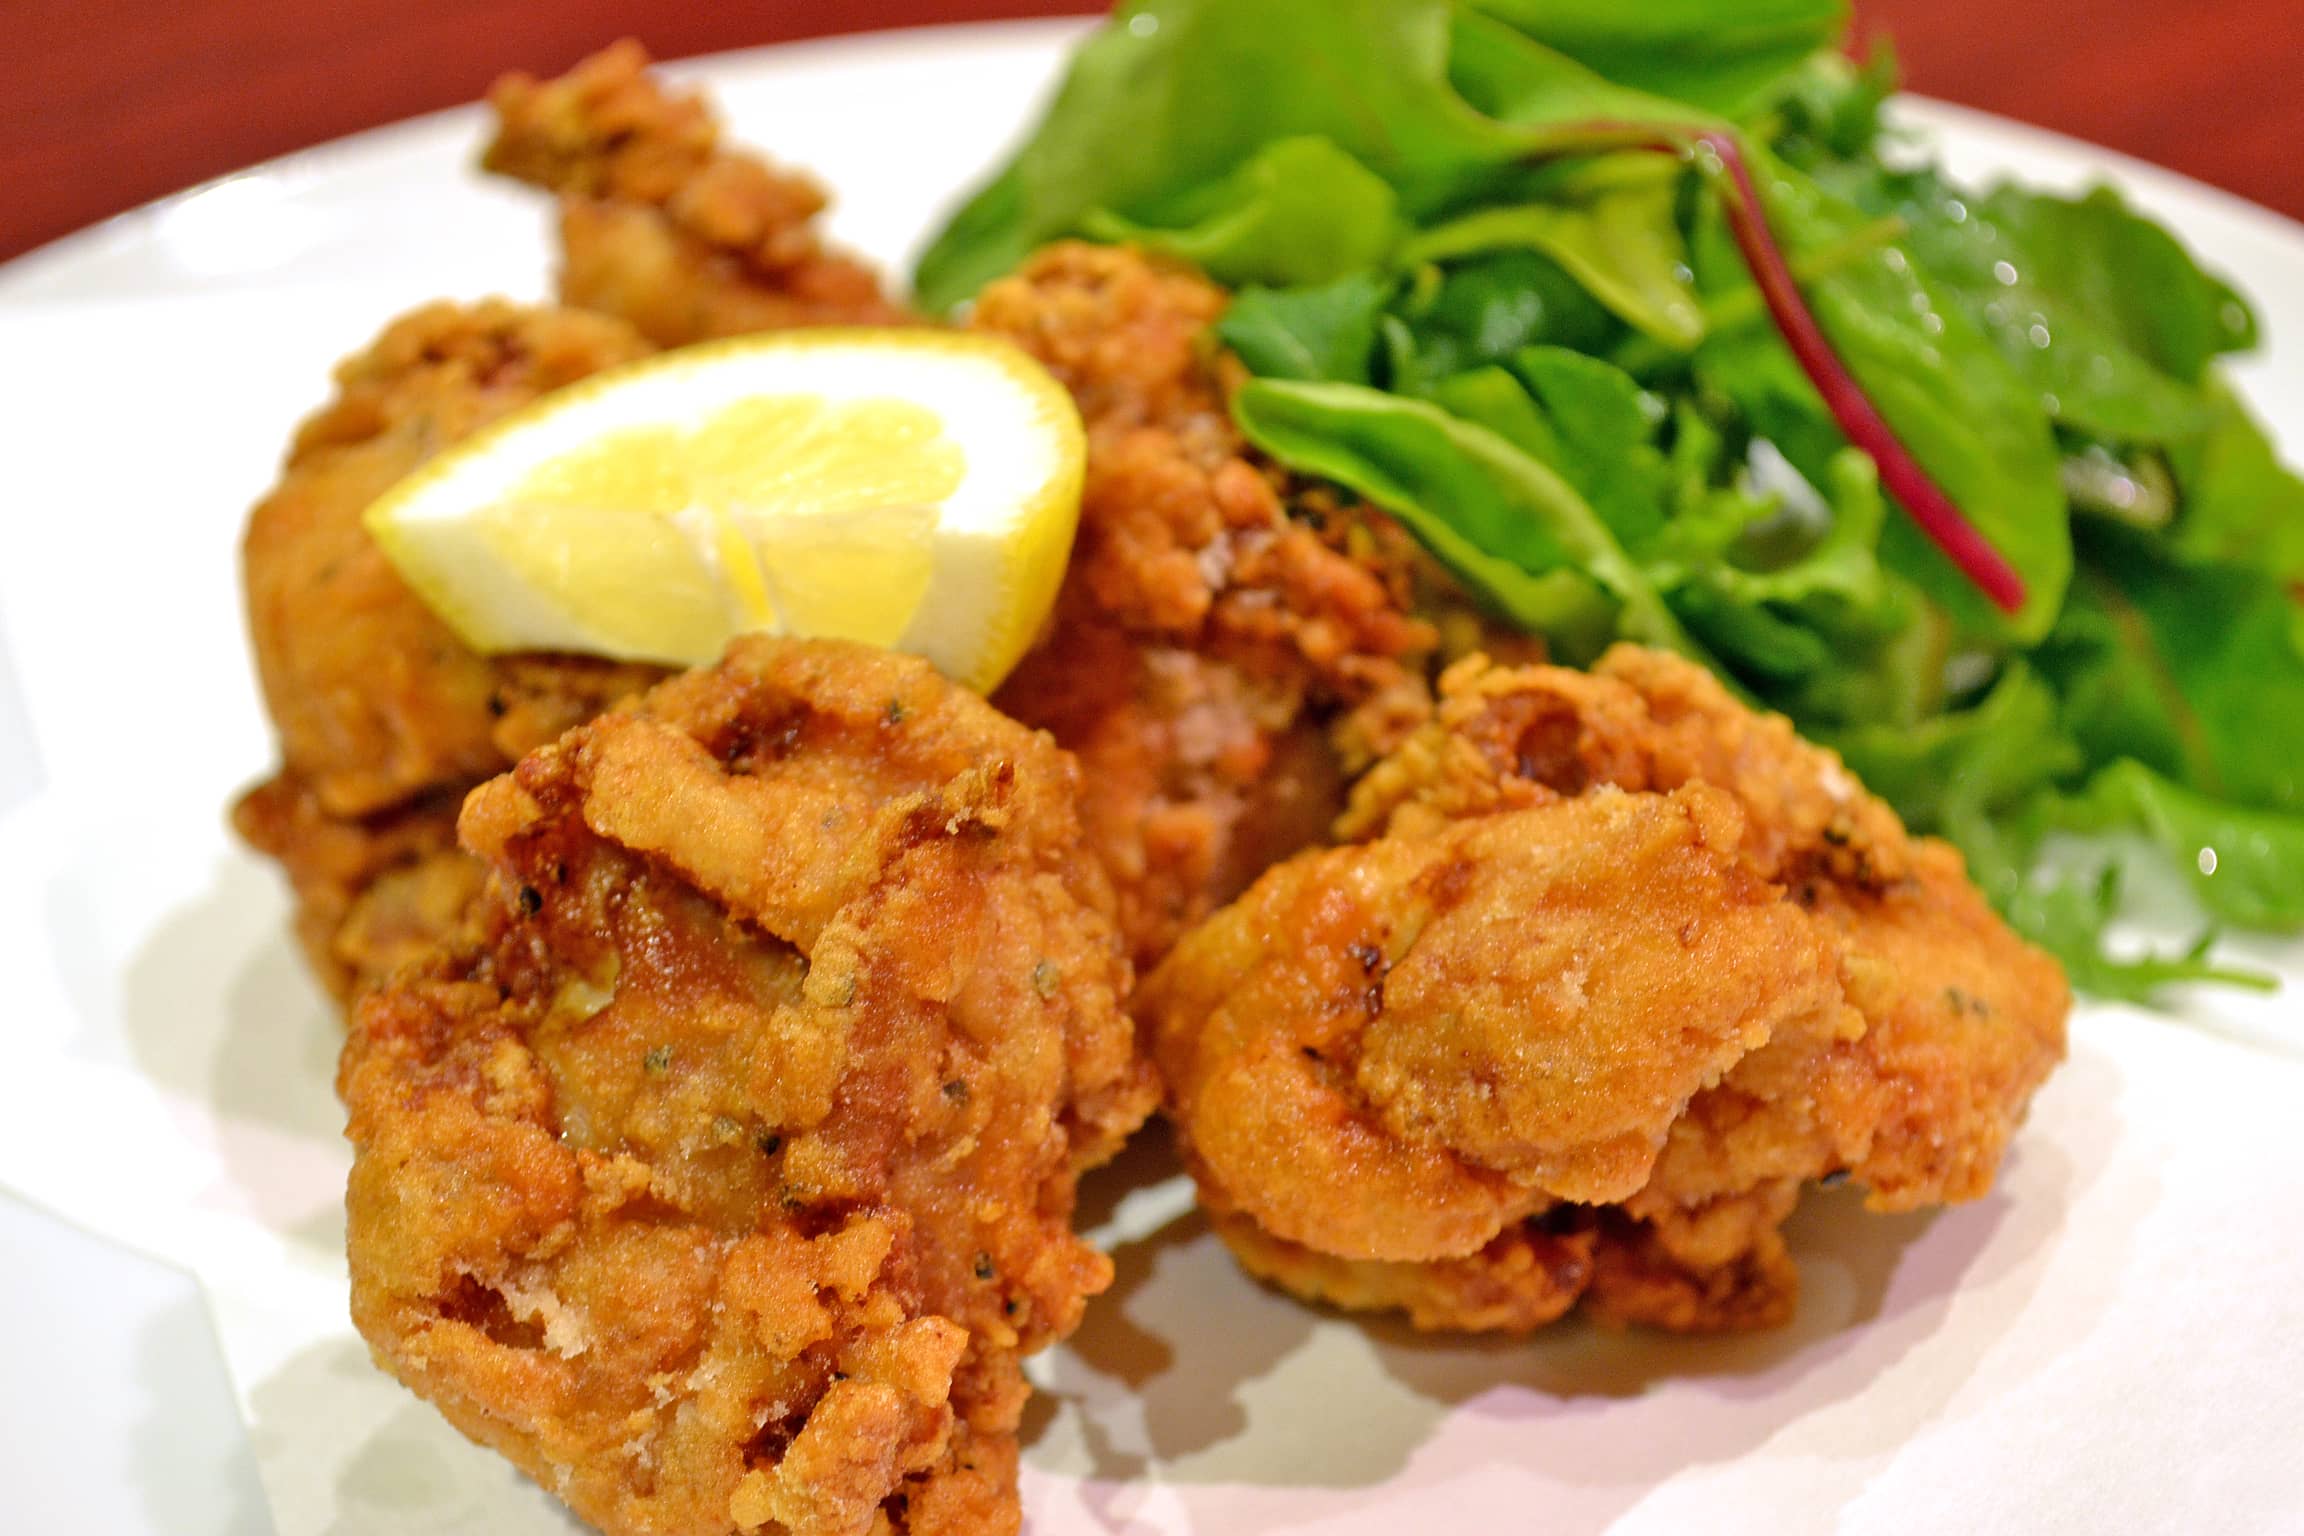 Golden fried chicken karaage with a side of a leafy salad and a slice of lemon